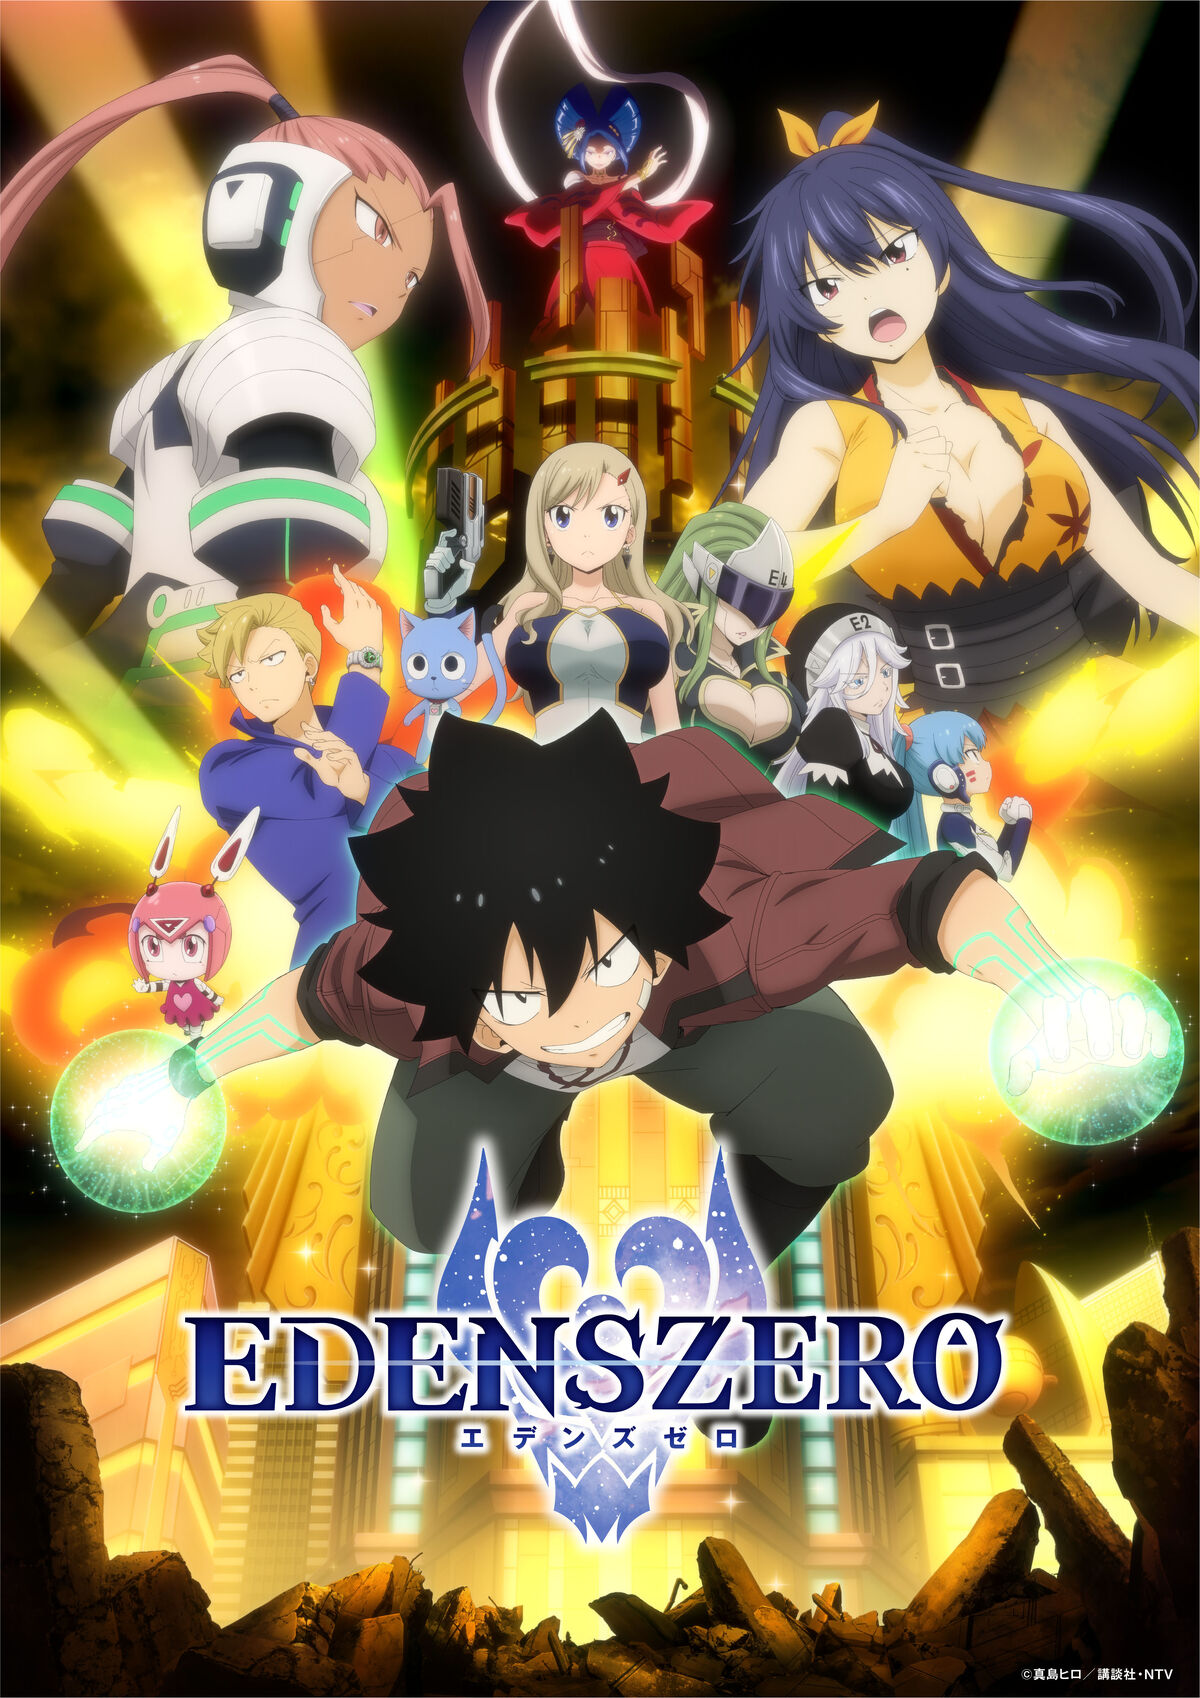 What To Expect From Season 2 of Edens Zero (According to the Manga)